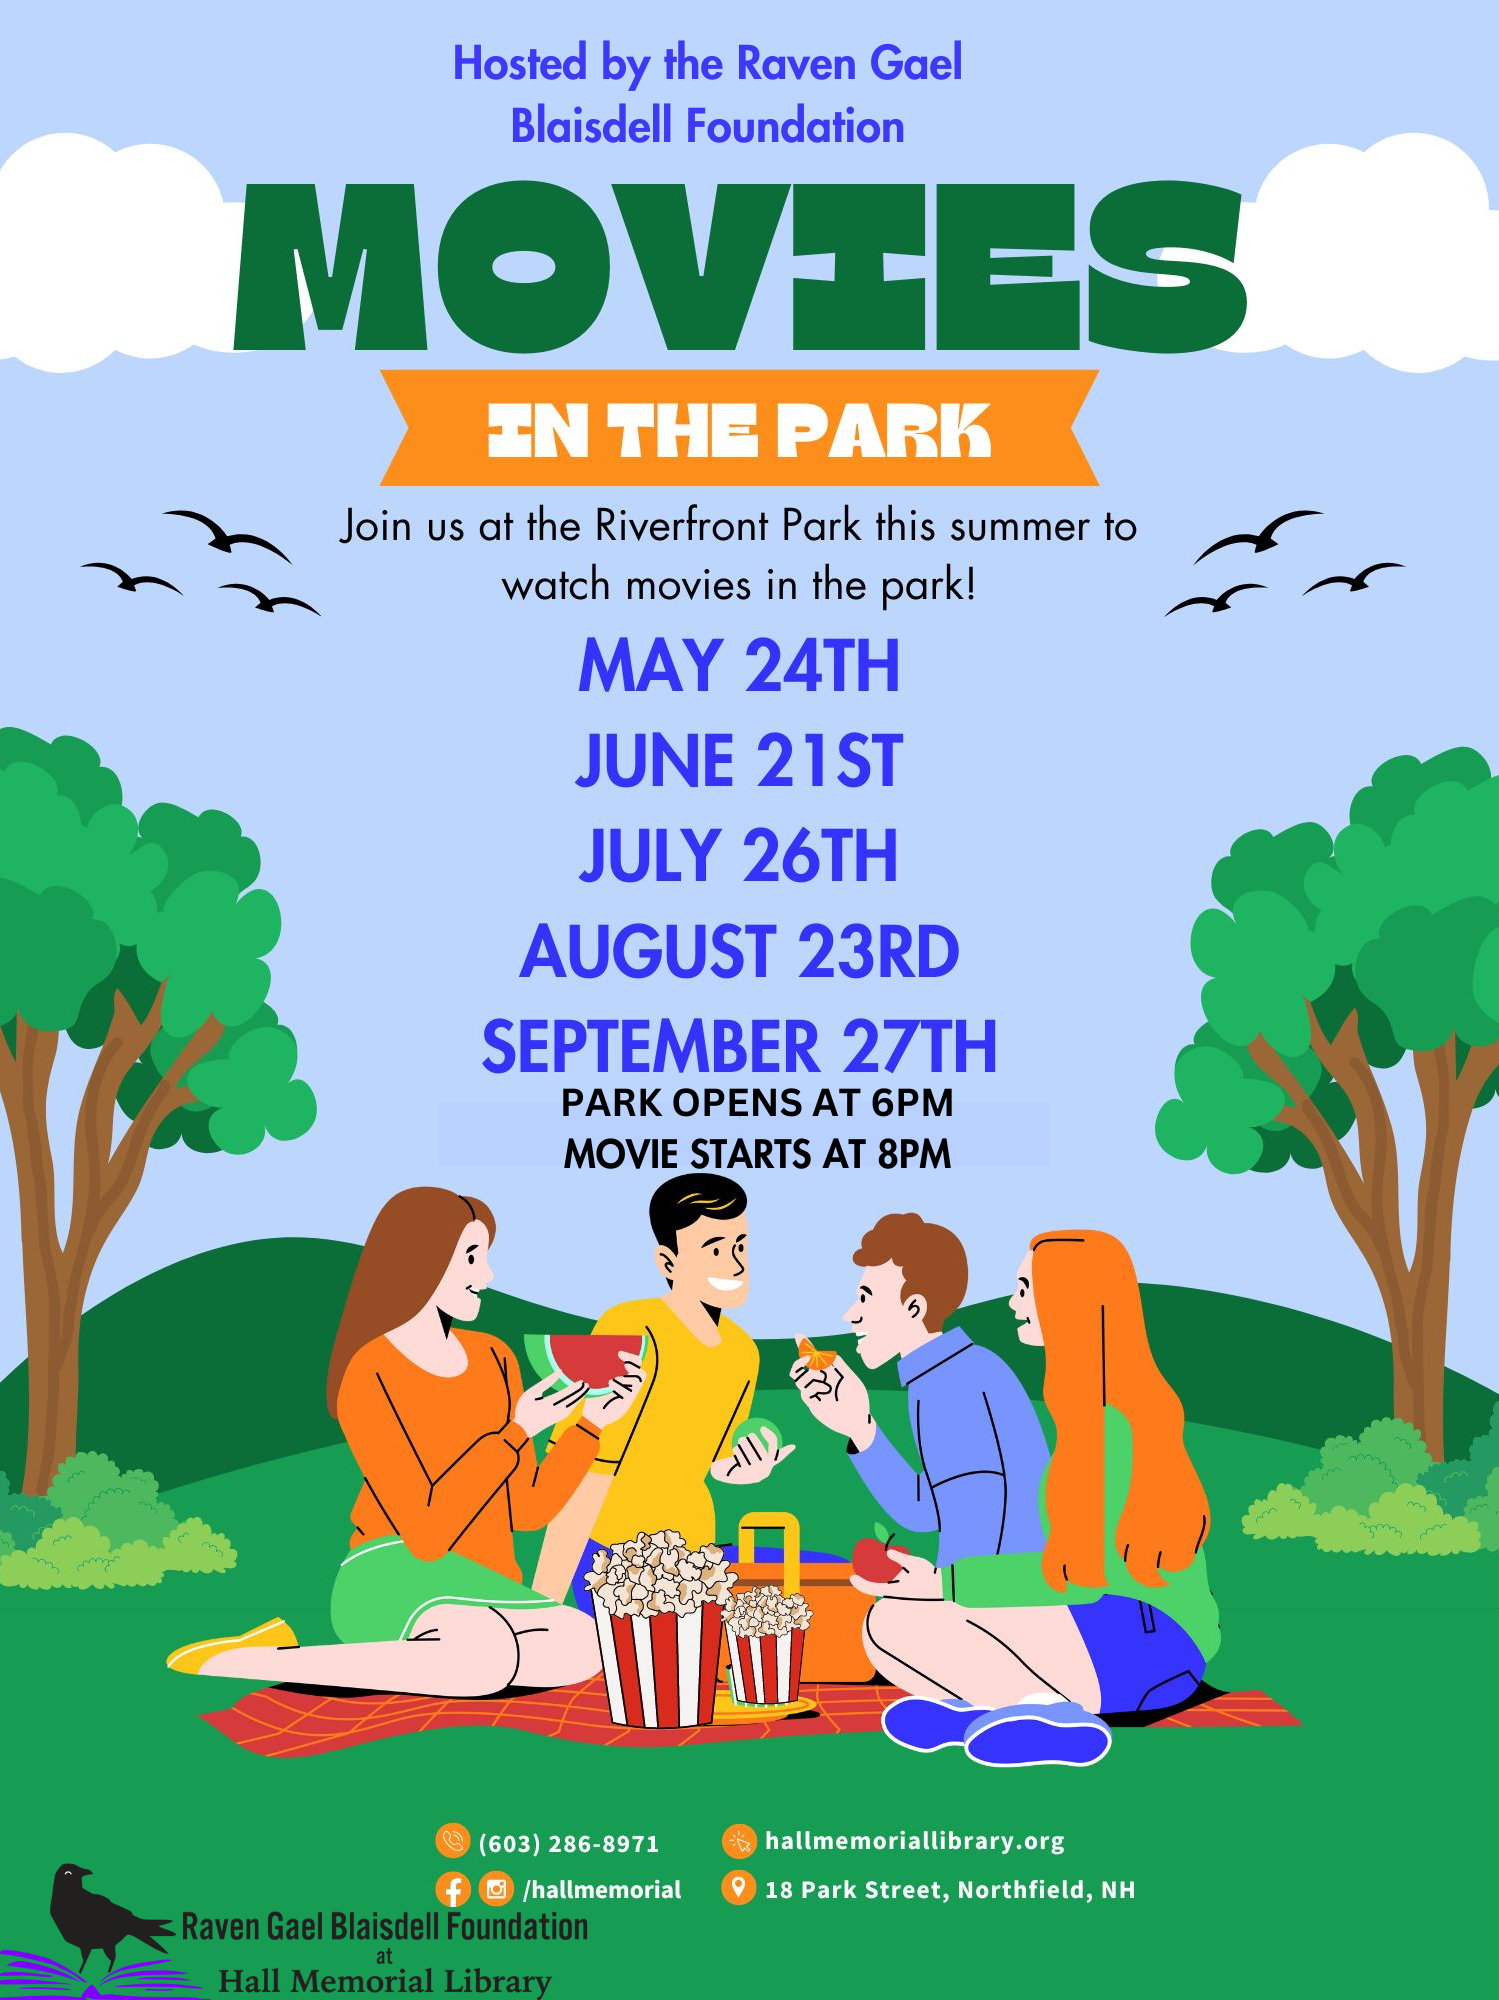 Movies in the Park! Join us at the Riverfront Park this summer to watch movies in the park! May 24th, June 21st, July 26th, August 23rd, and September 27th. Park opens at 6pm and movie starts at dusk!